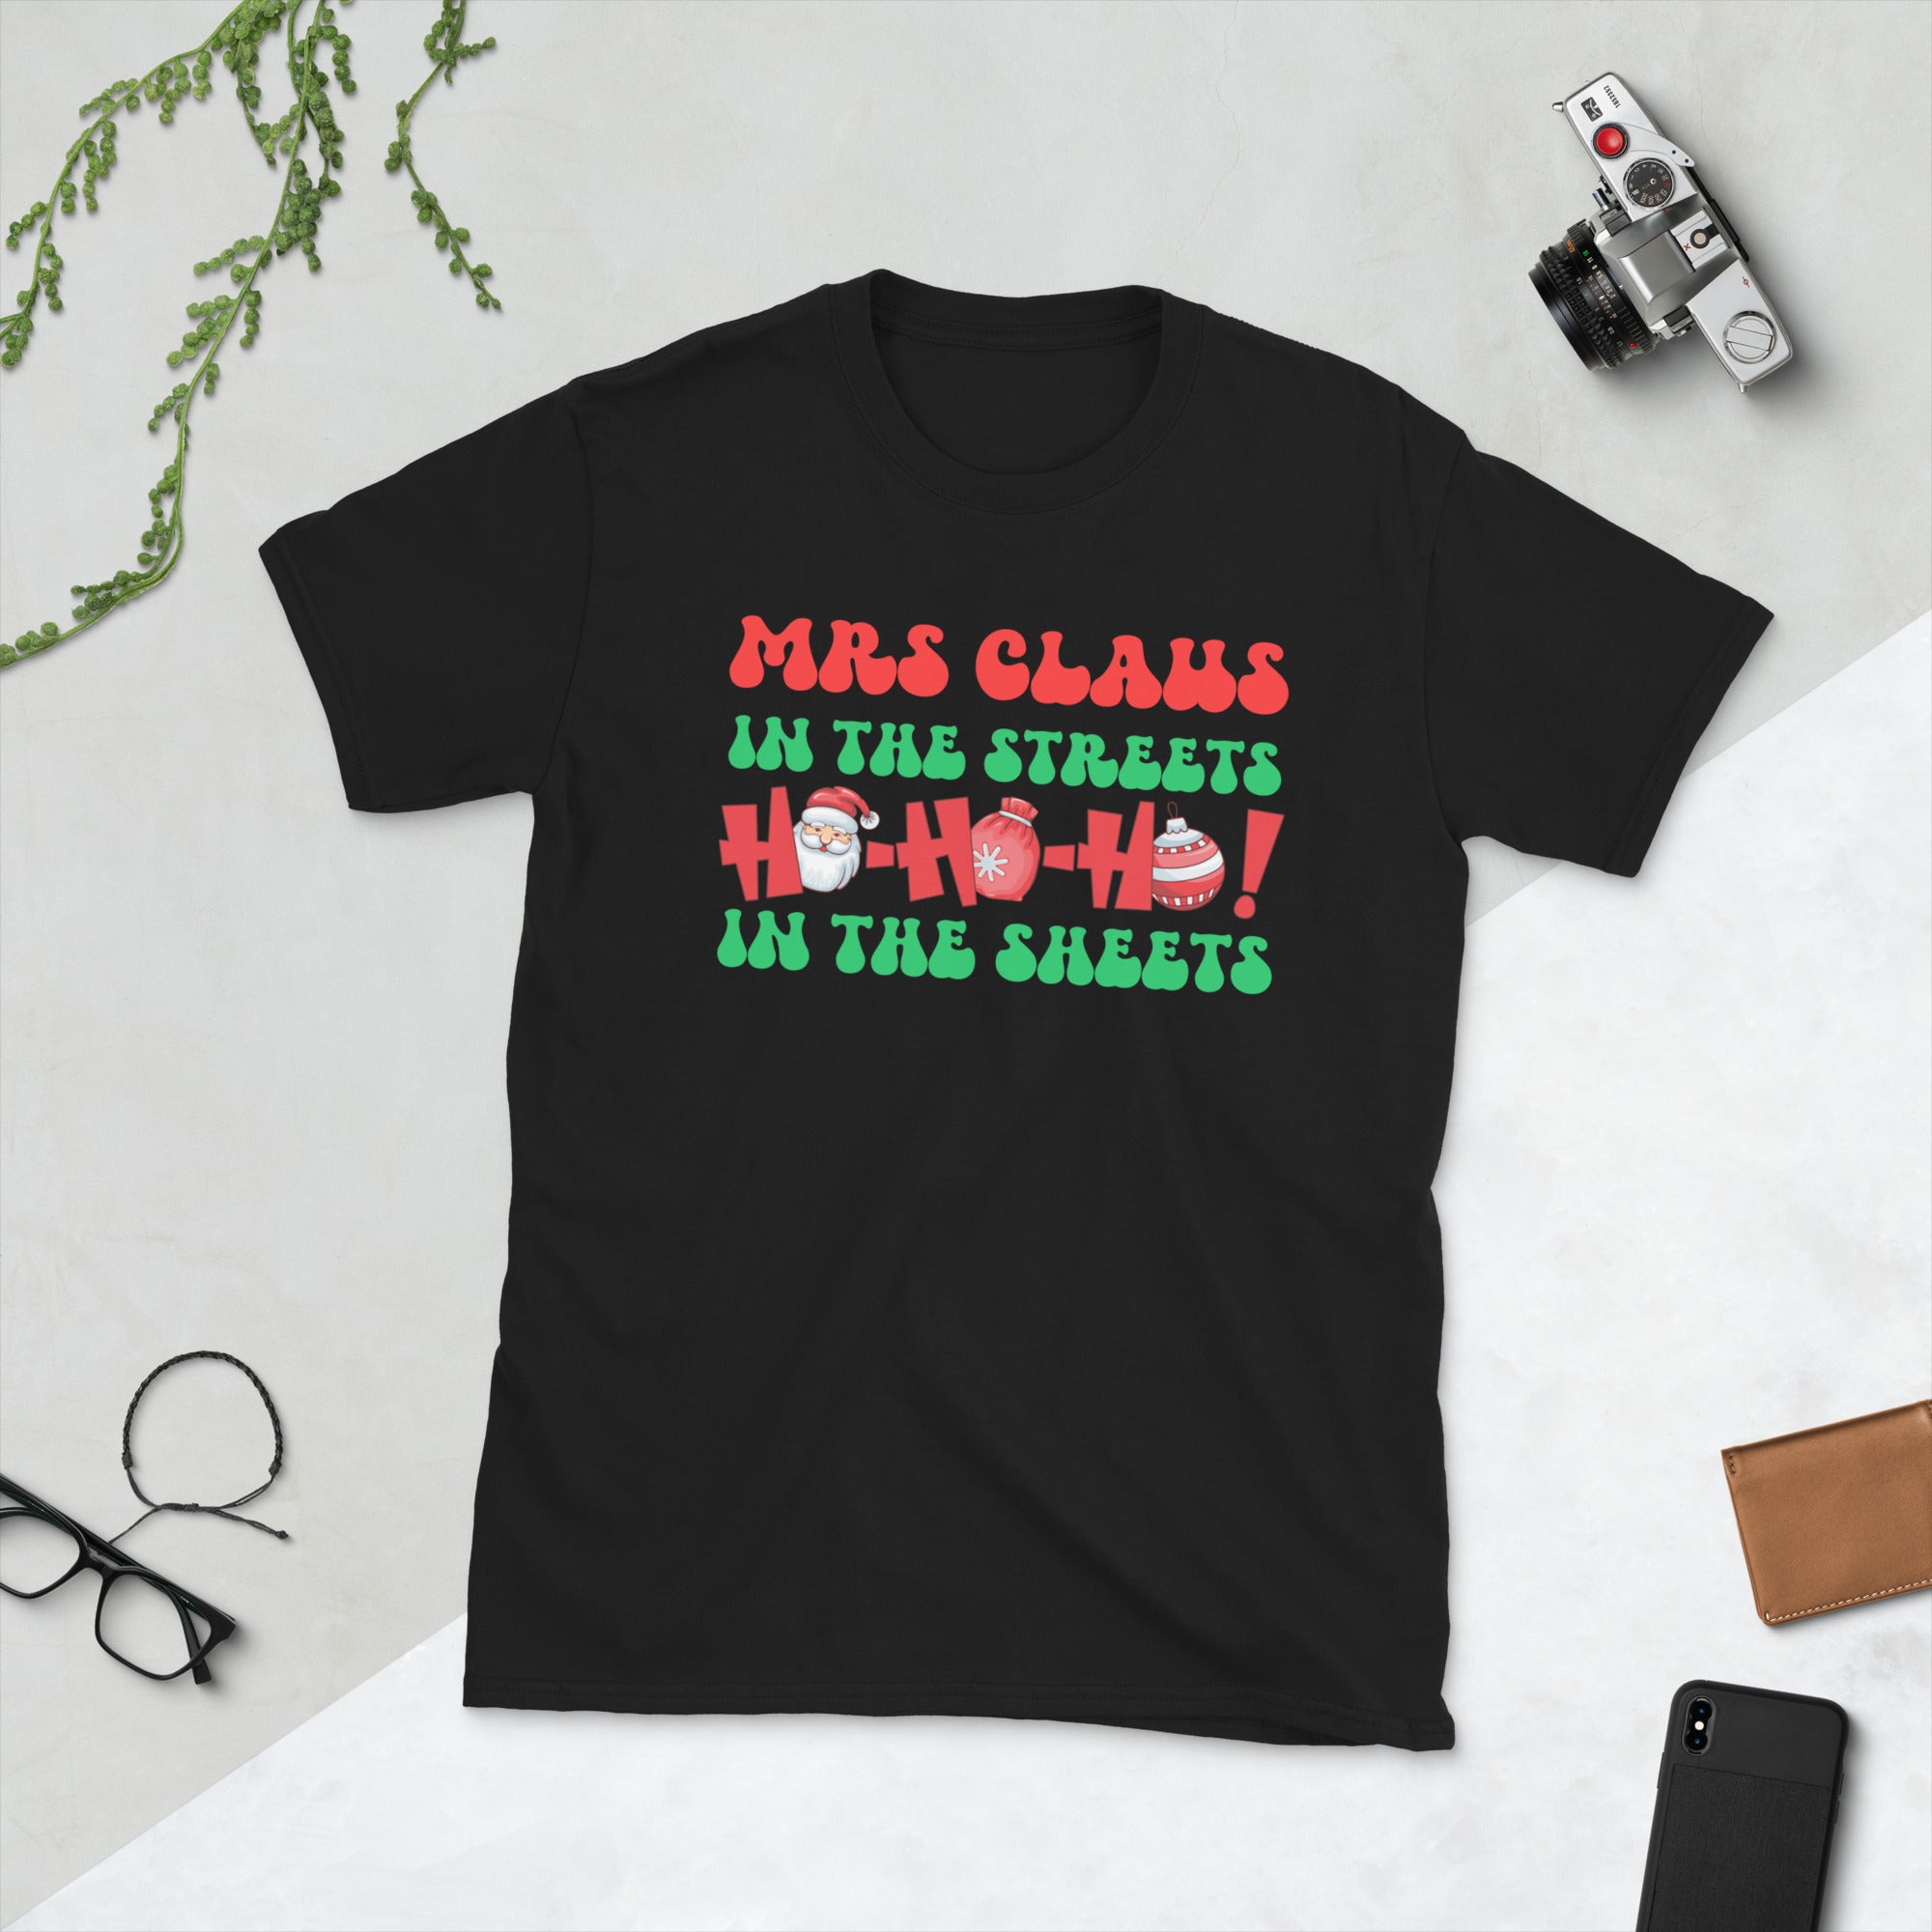 Mrs Claus In The Streets Ho Ho Ho In The Sheets, Funny Christmas, Mrs Claus Naughty Xmas Gifts Shirt